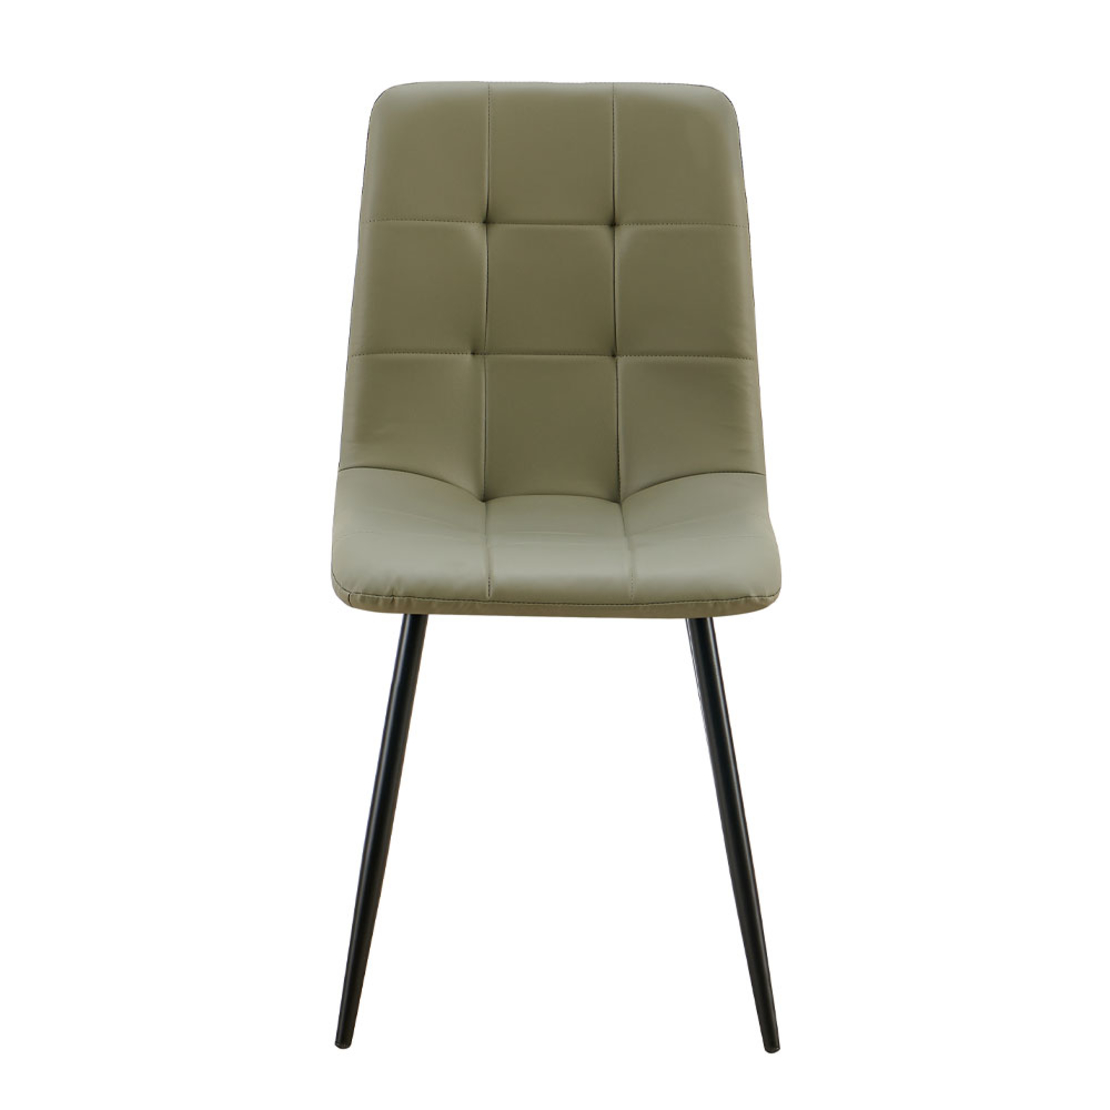 CARRE CHAIR FABRIC OLIVE GREEN METAL E1 PRC